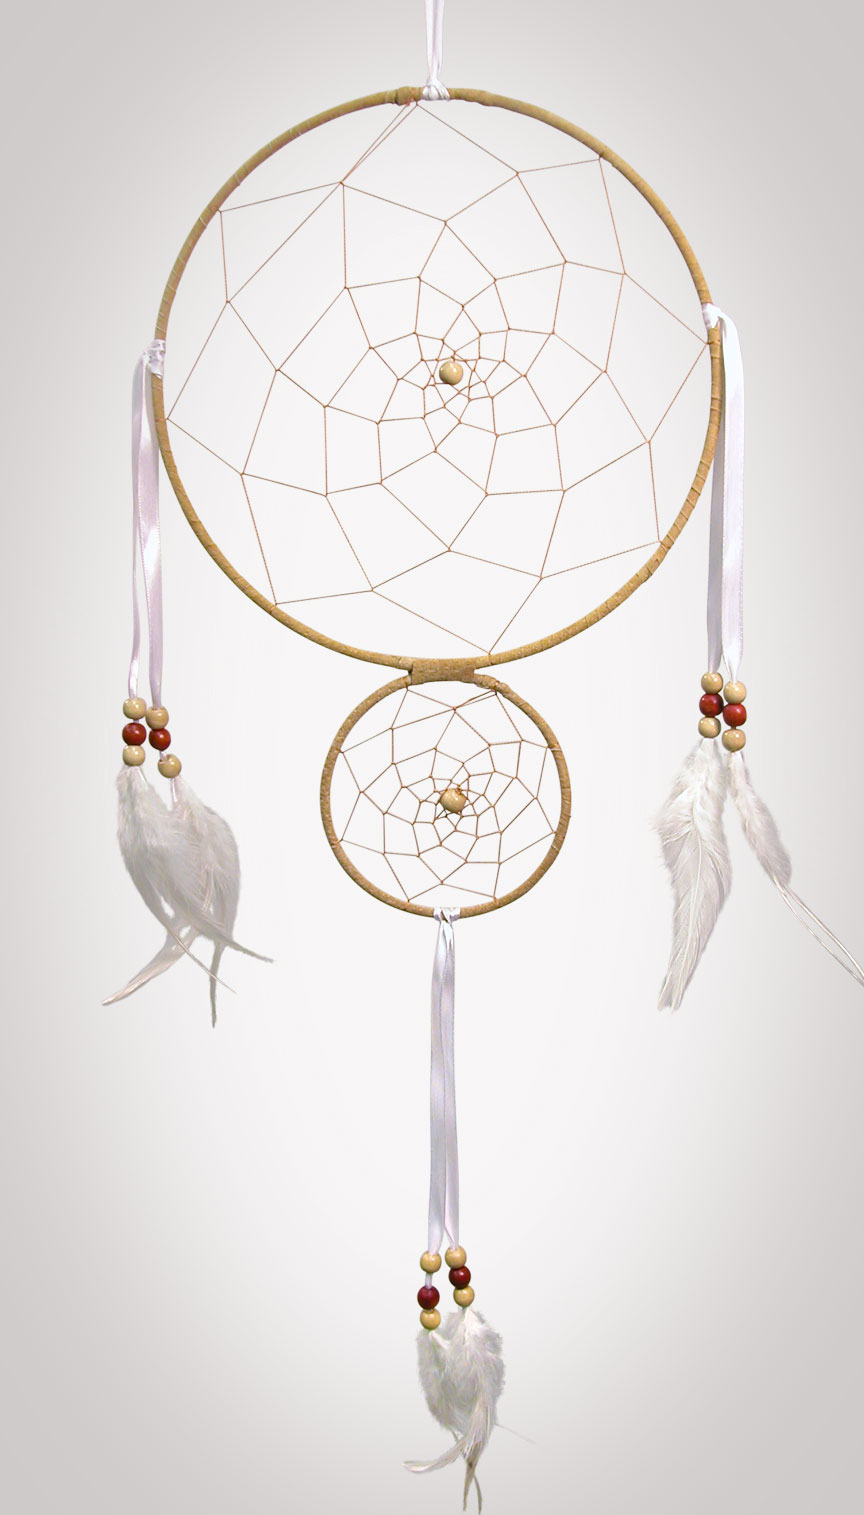 Shows an image of our dreamcatcher owg001